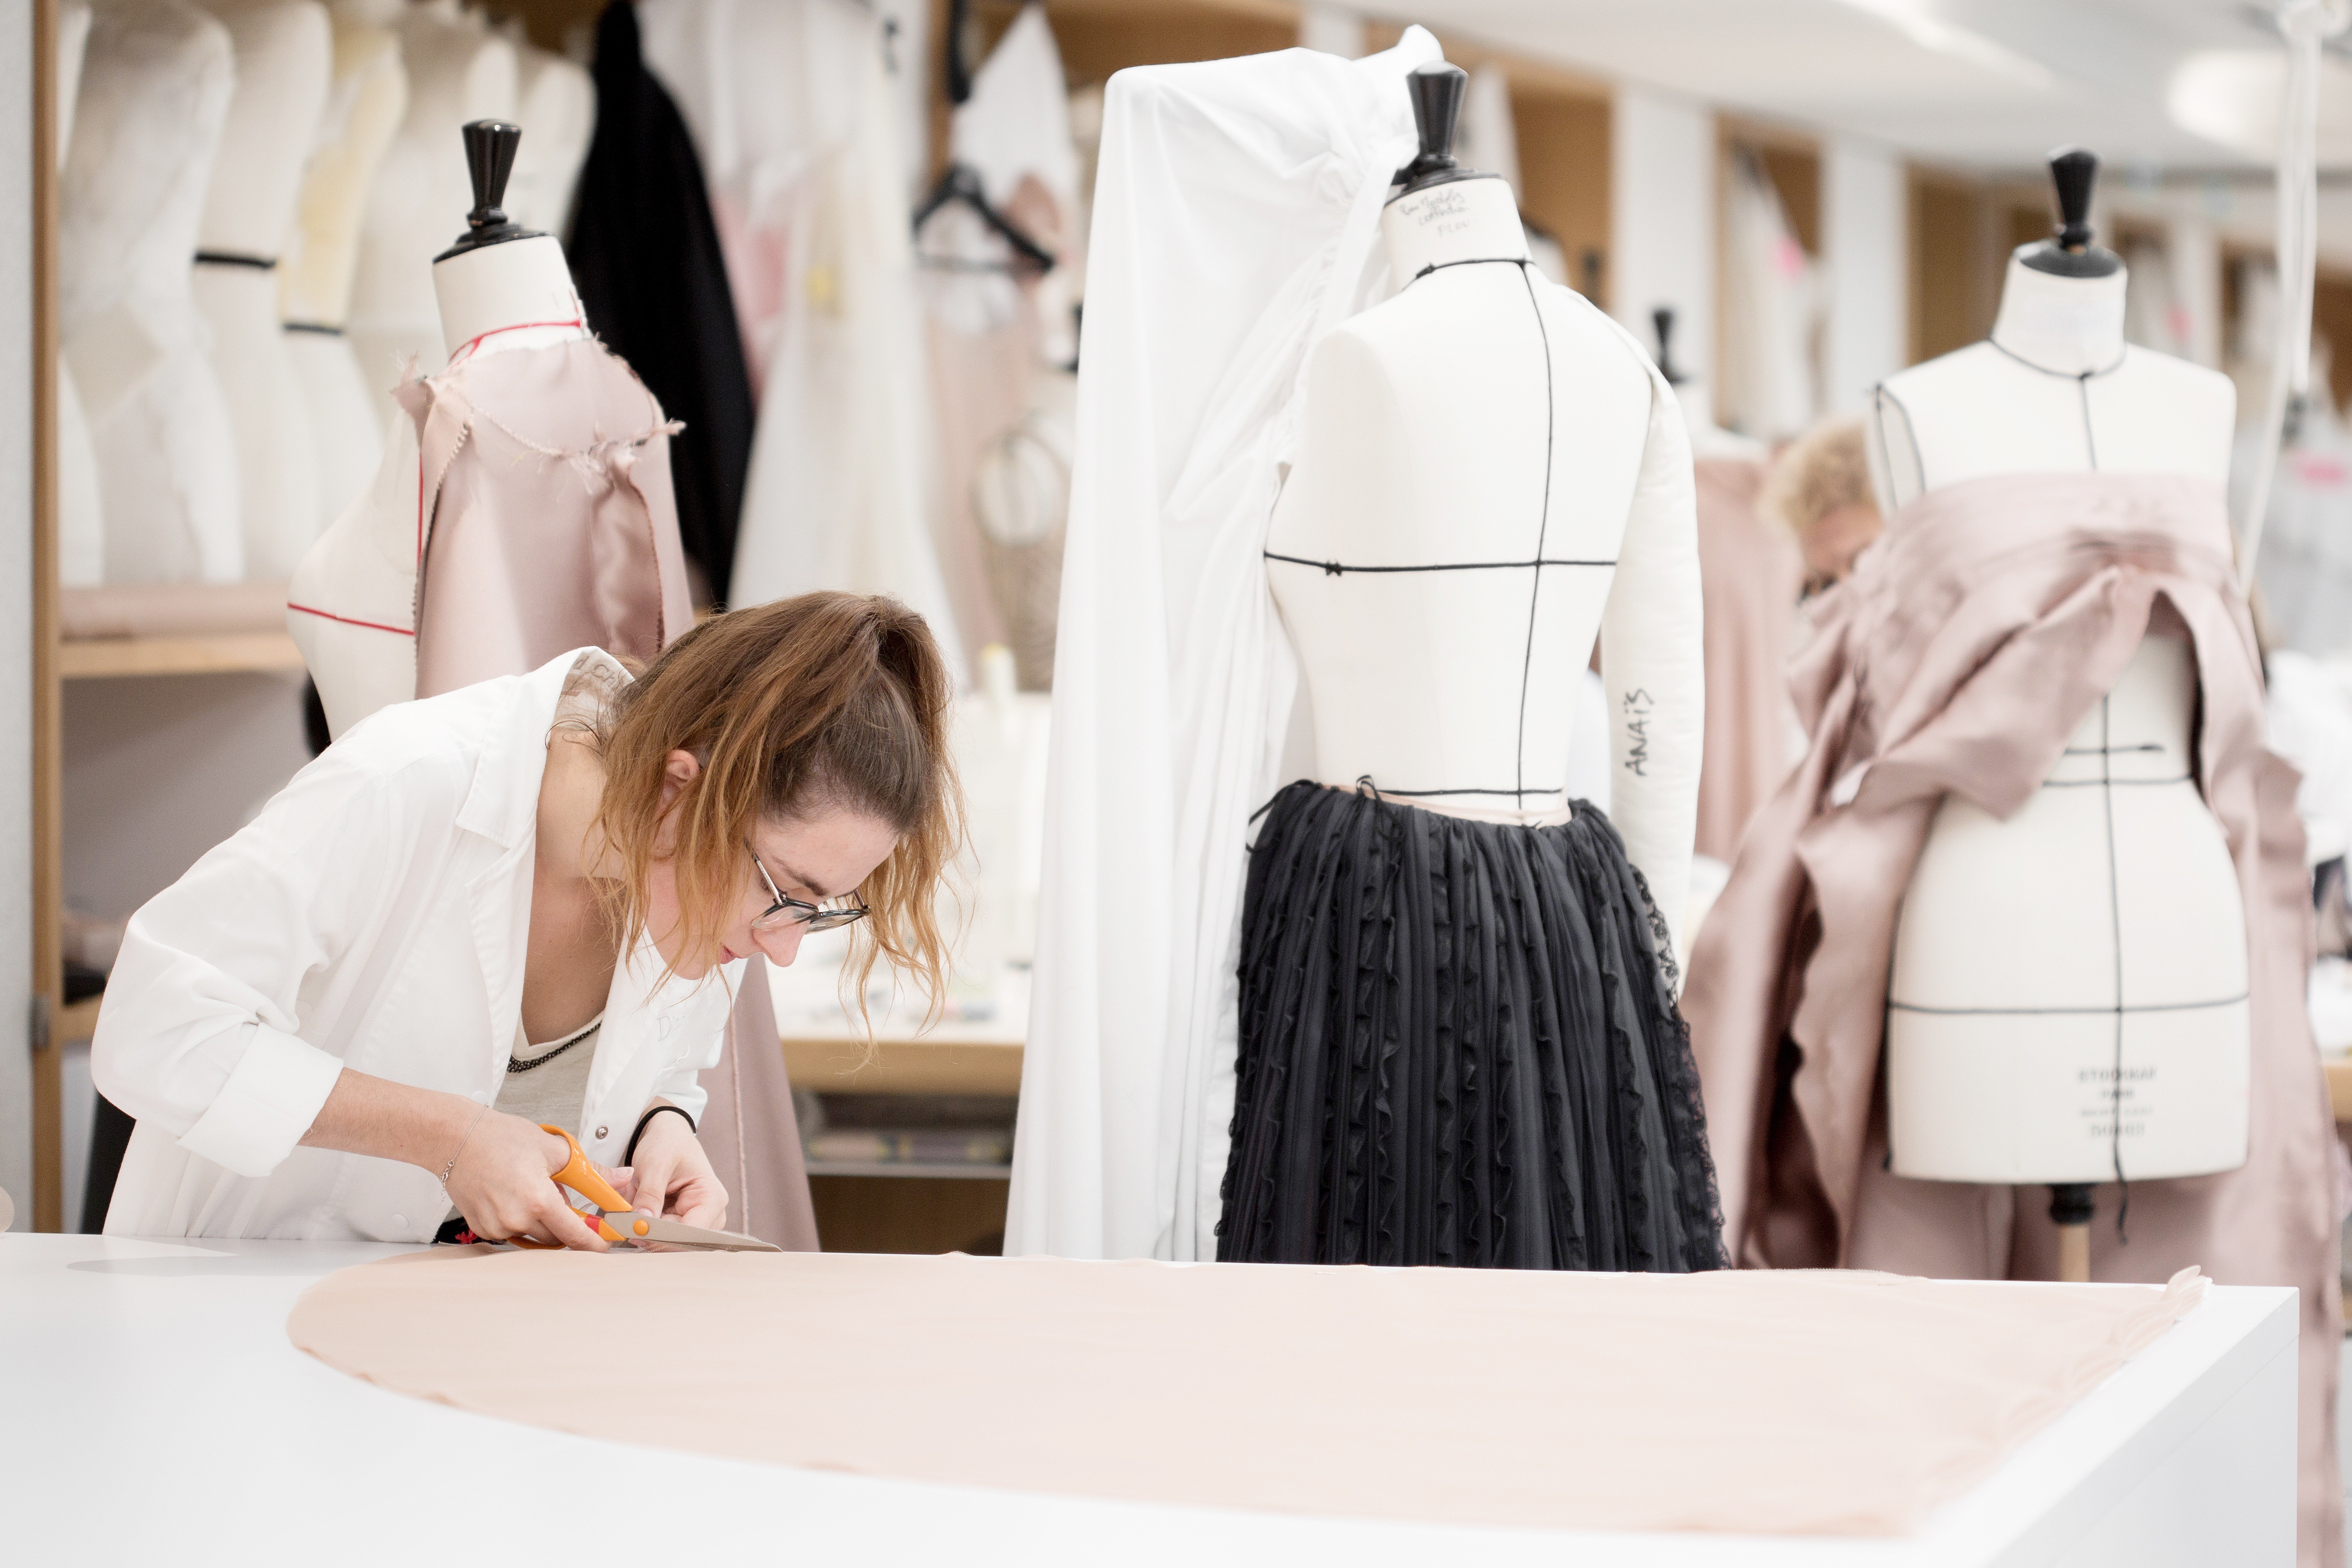 Artisanal skills on display at Dior’s atelier. Photo: Sophie Carre